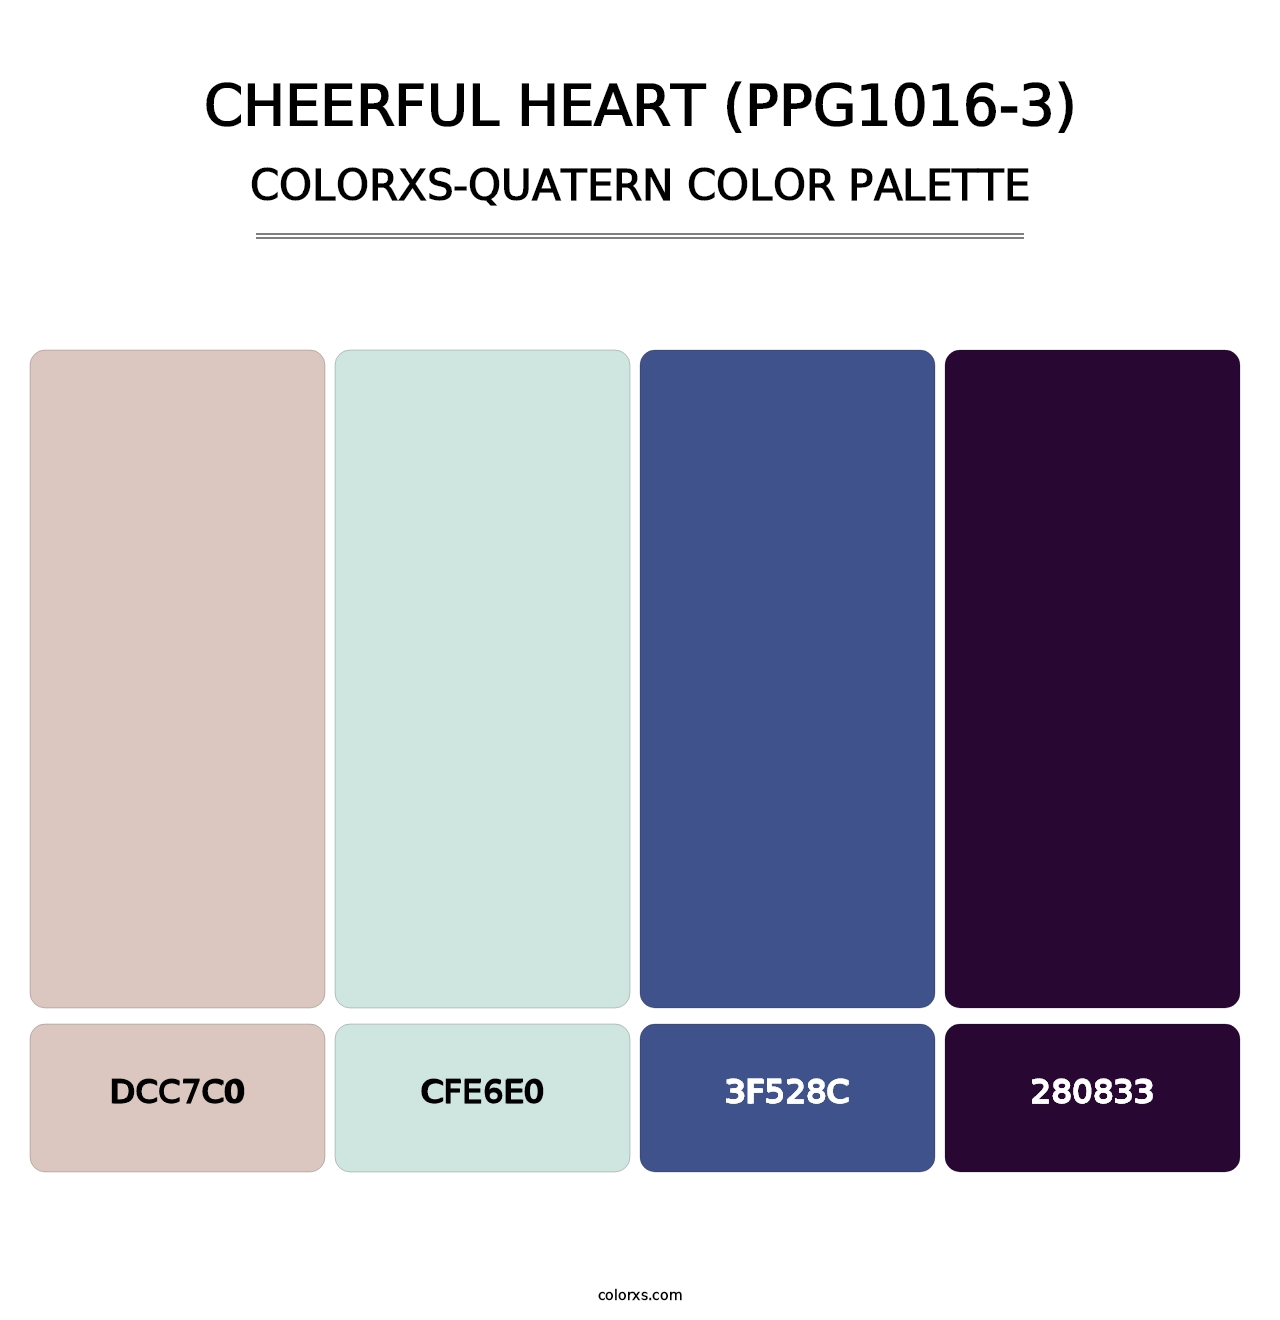 Cheerful Heart (PPG1016-3) - Colorxs Quatern Palette